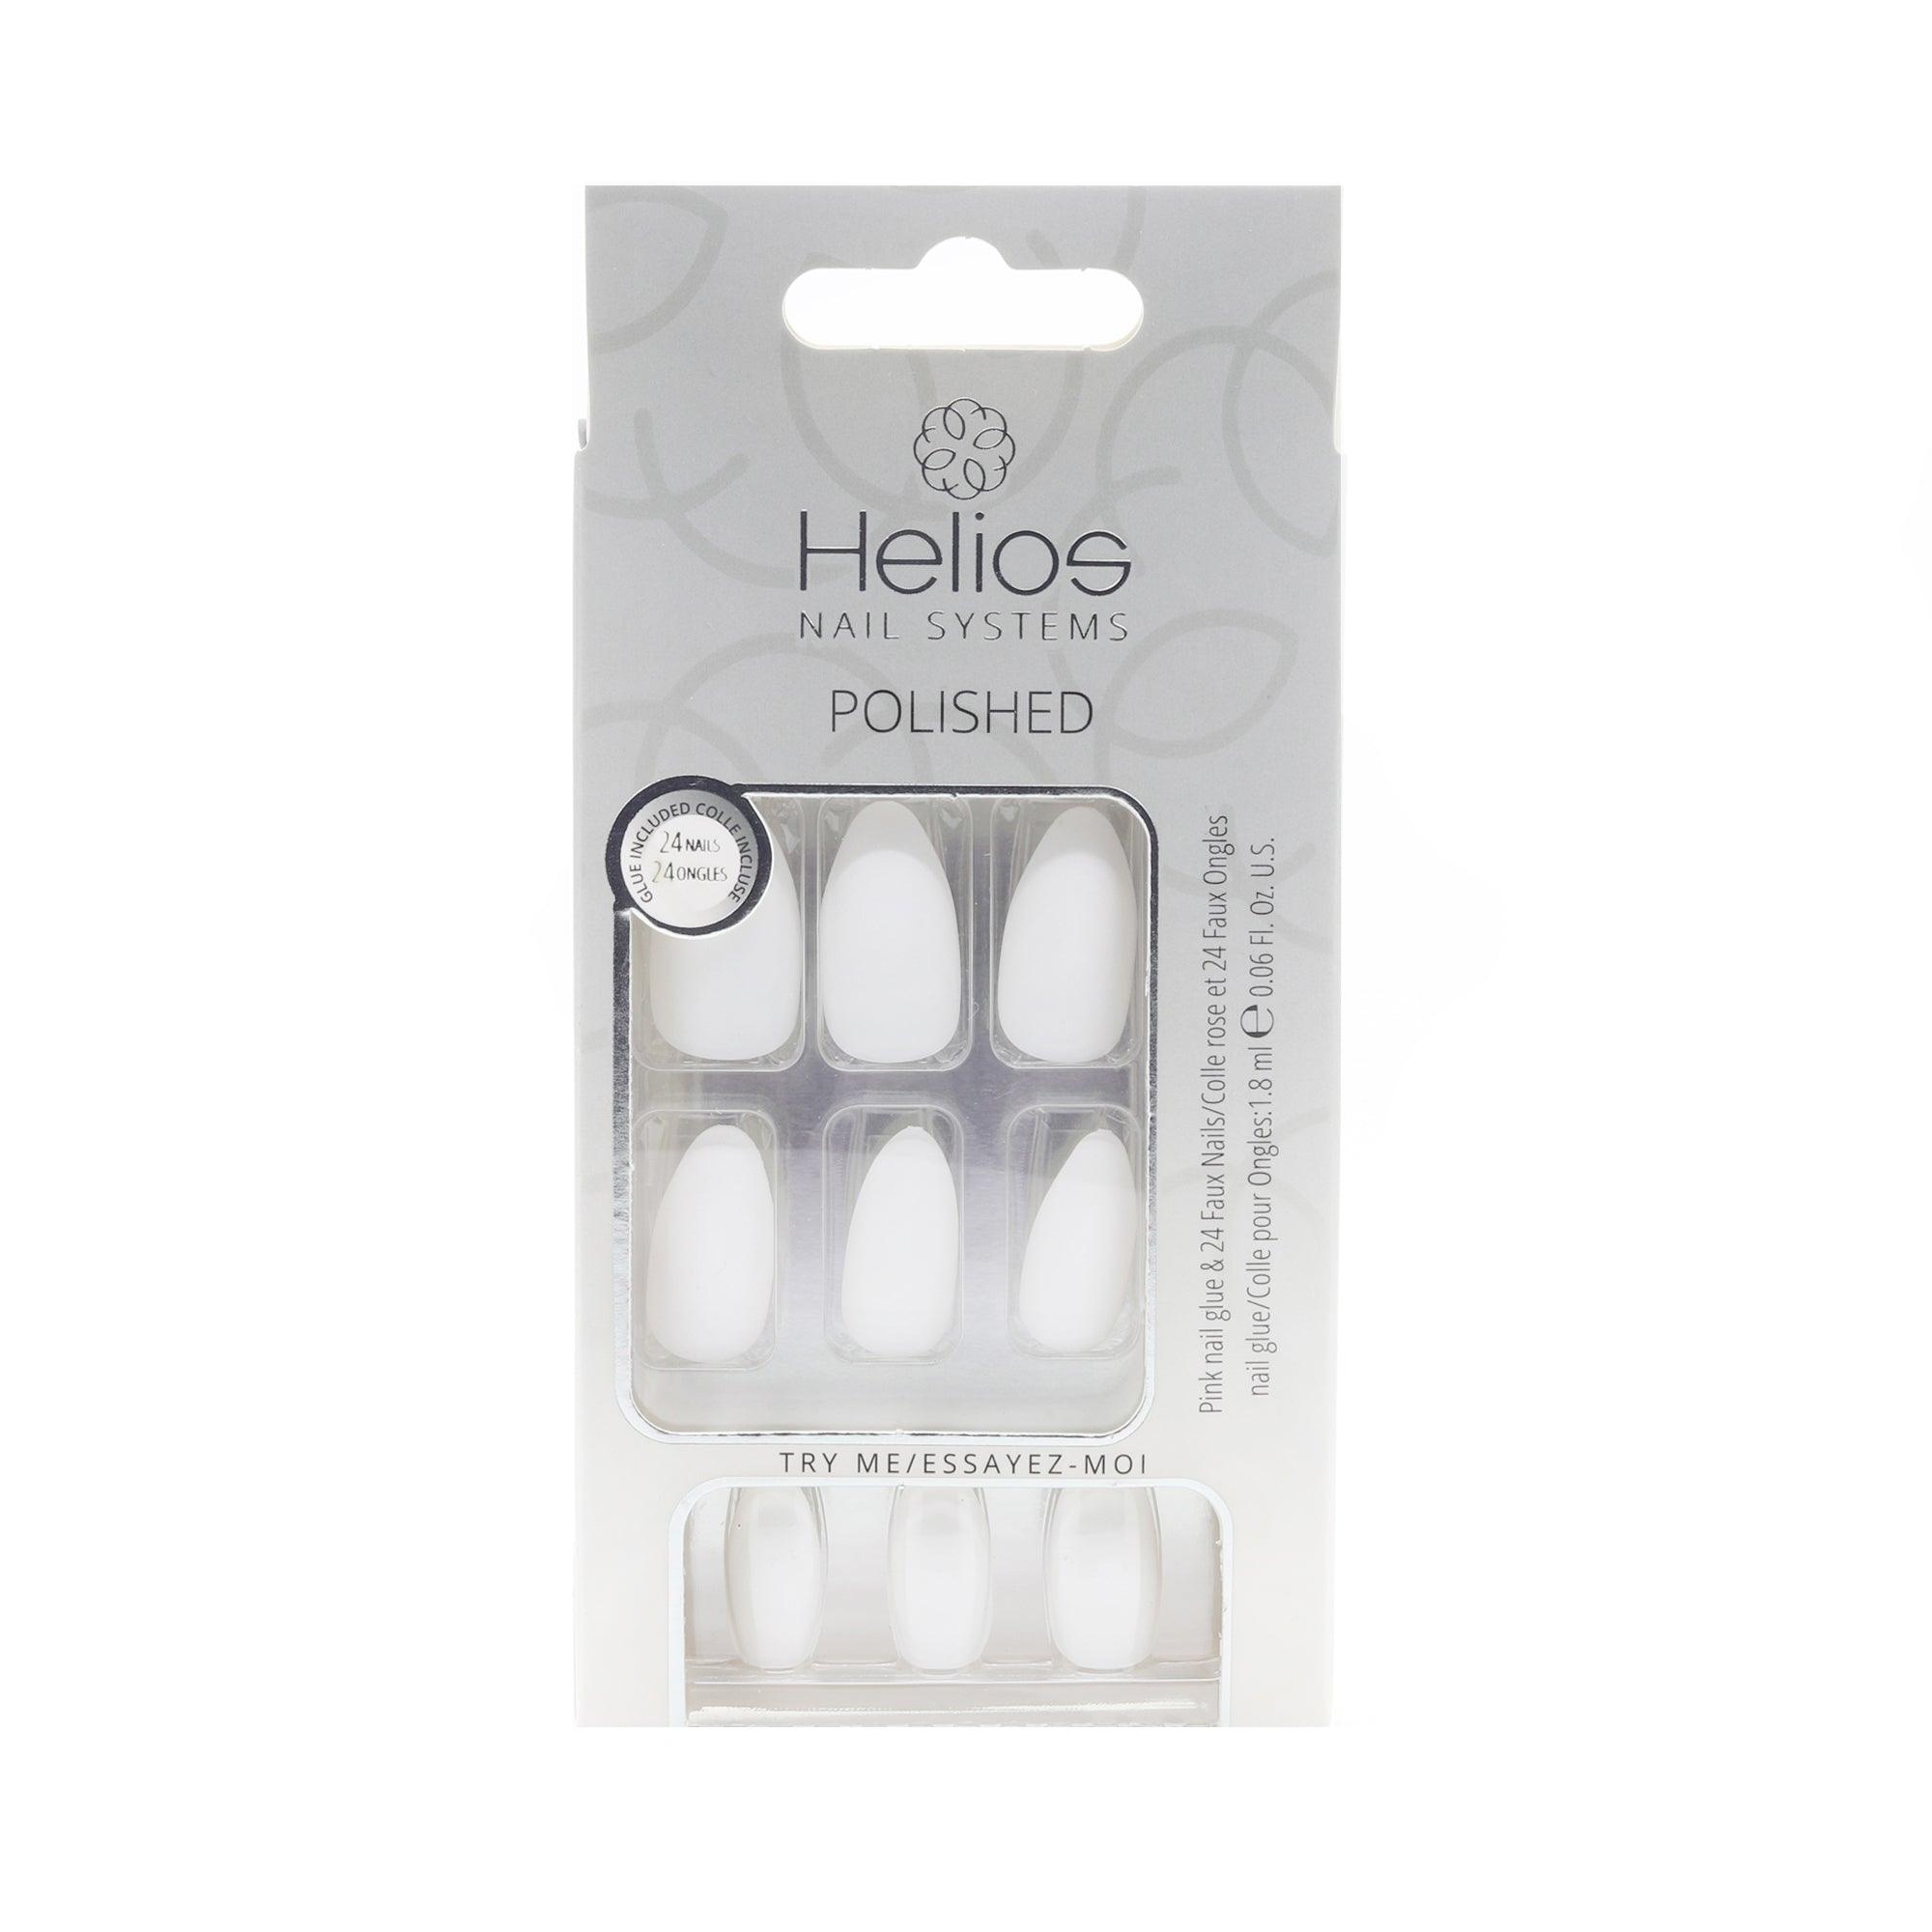 POLISHED ARTIFICIAL NAILS - Helios Nail Systems